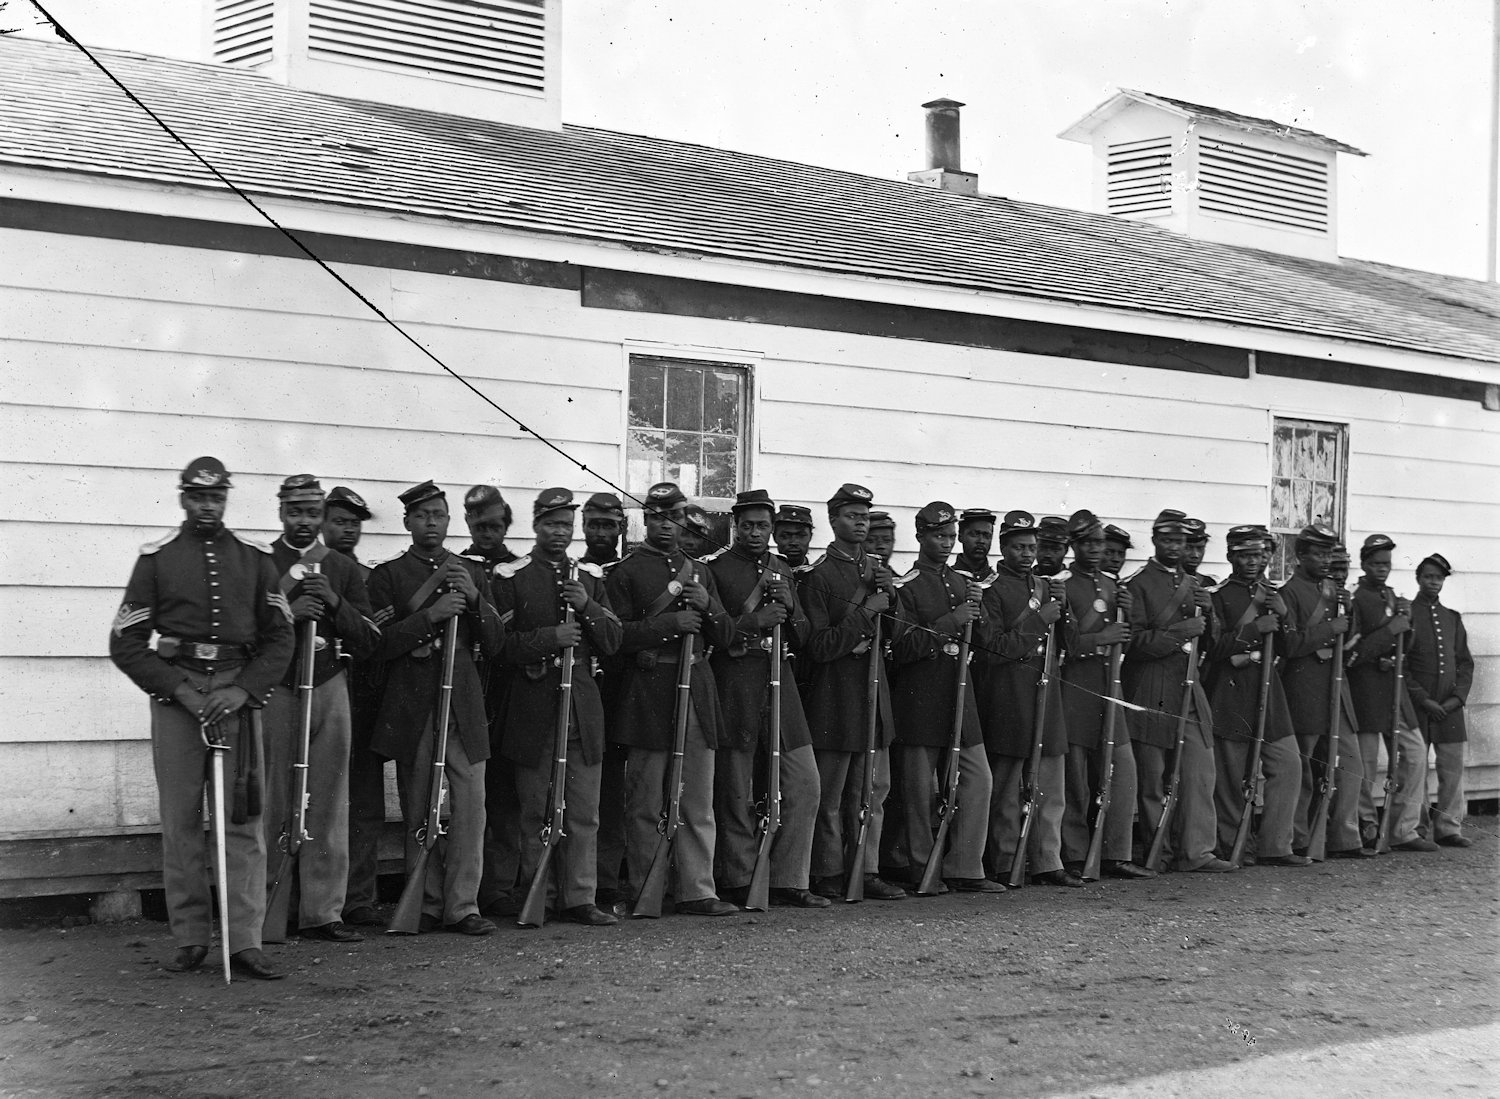 Company I of the 56th Colored Regiment